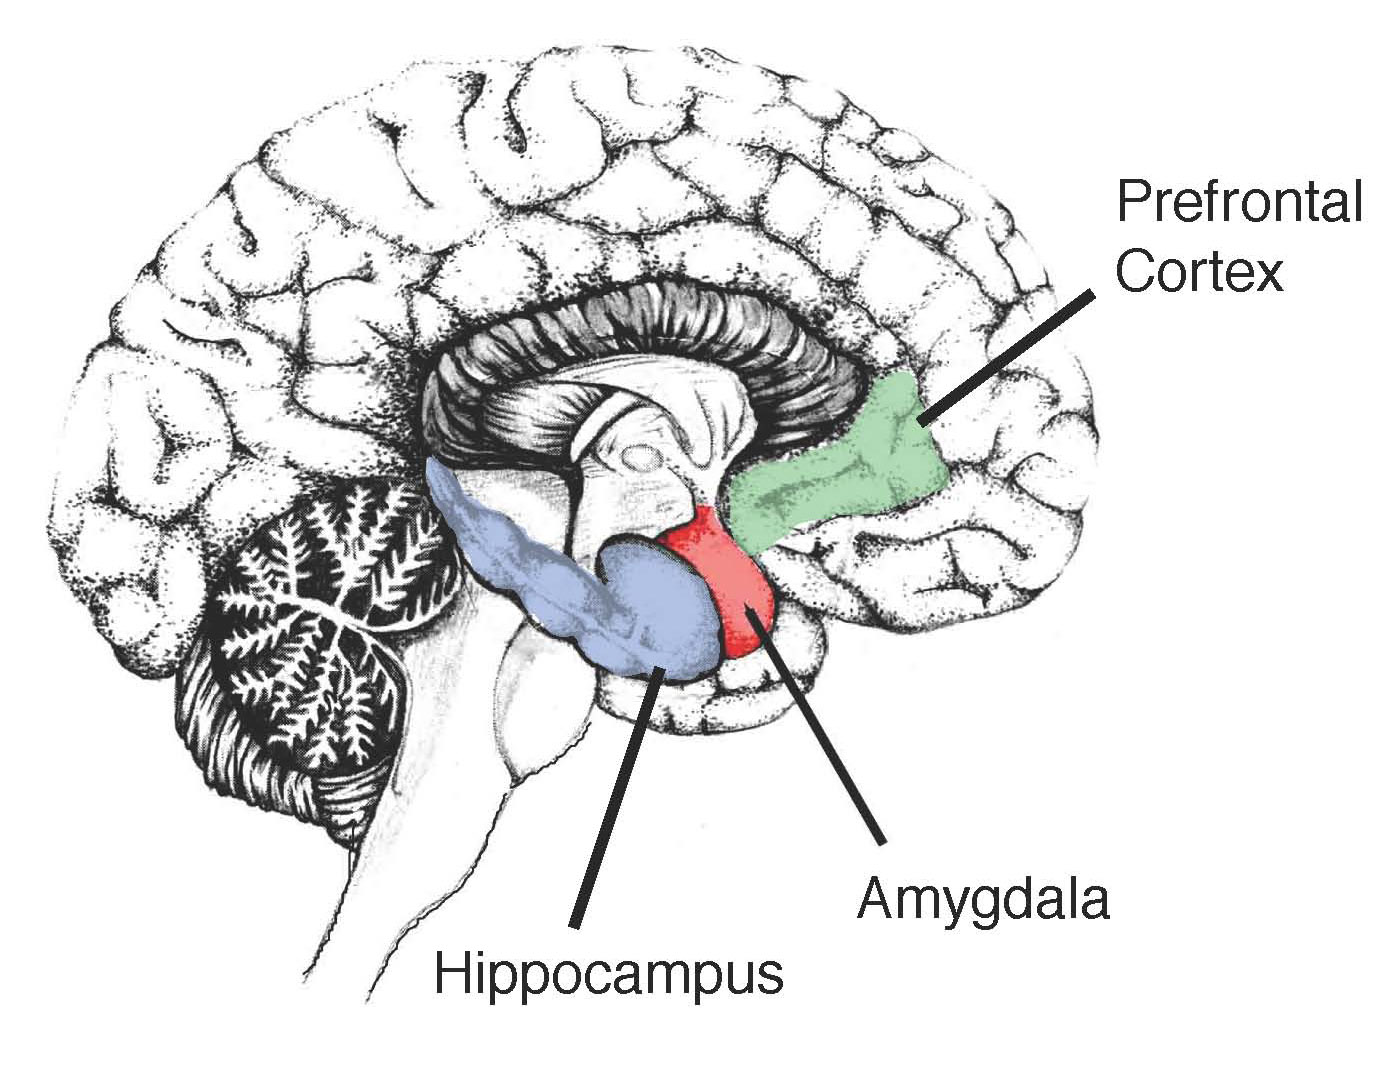 Blood Sugar Levels May Affect Hippocampus, Says Study ...